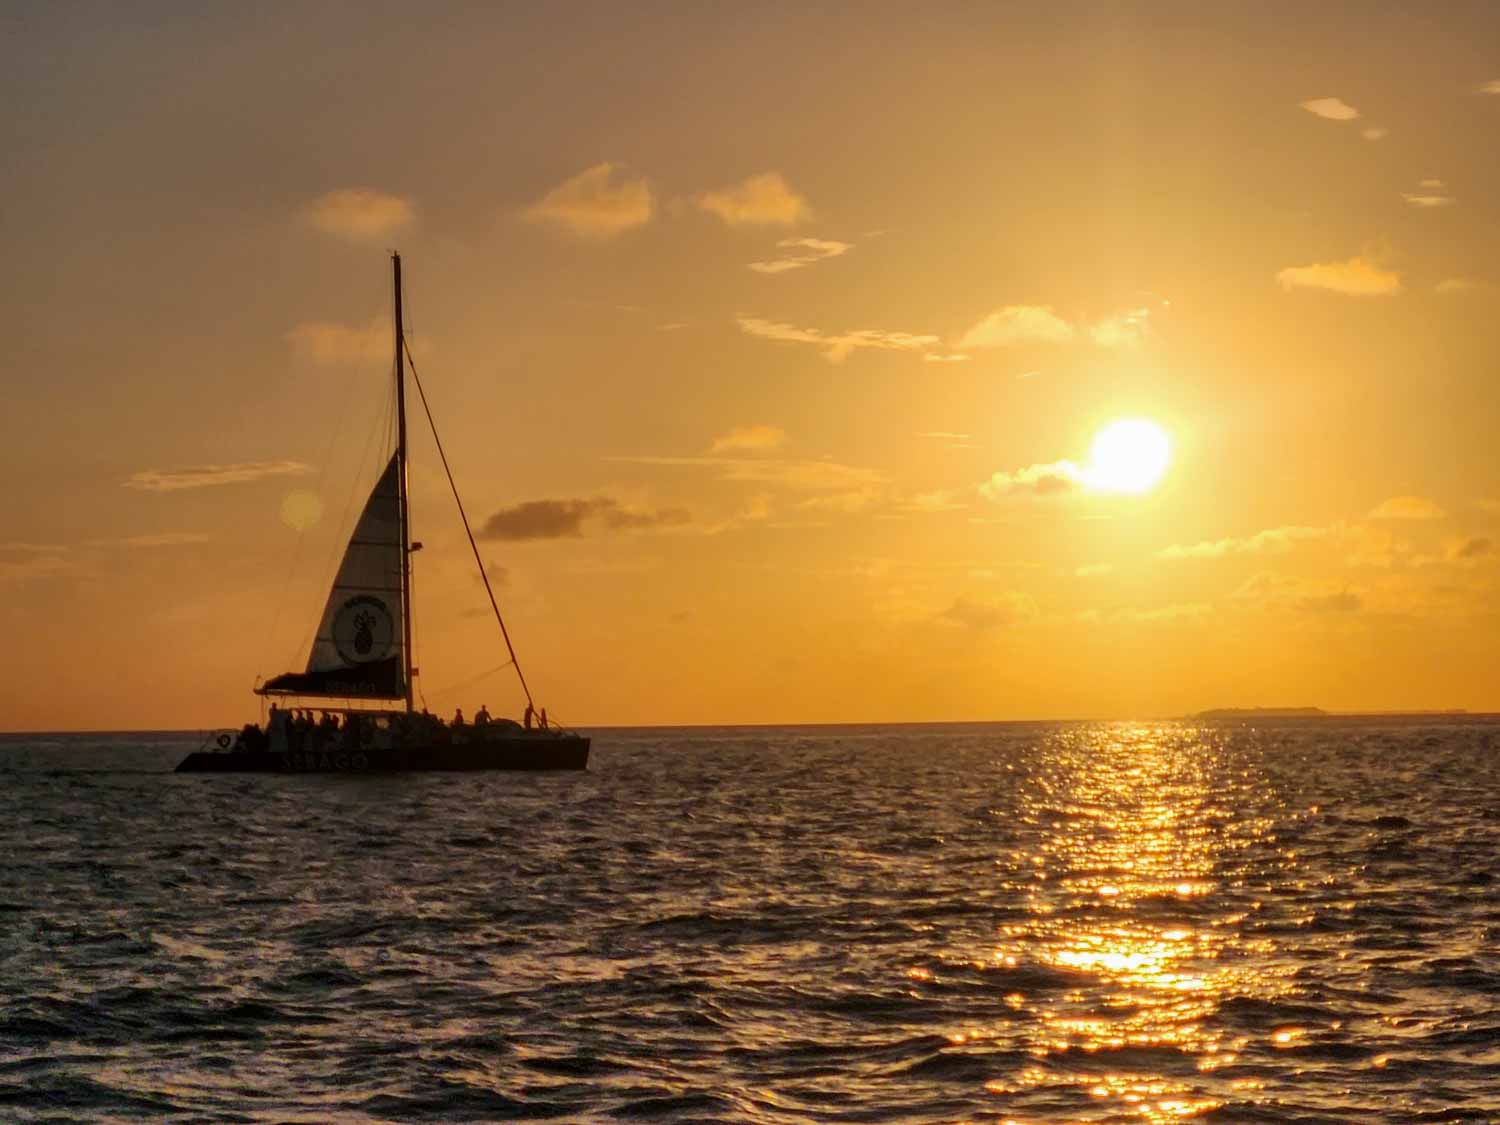 View of a sailing ship silhouetted against the horizon just before sunset - a sunset cruise is one of the best things to do in Key West with older kids